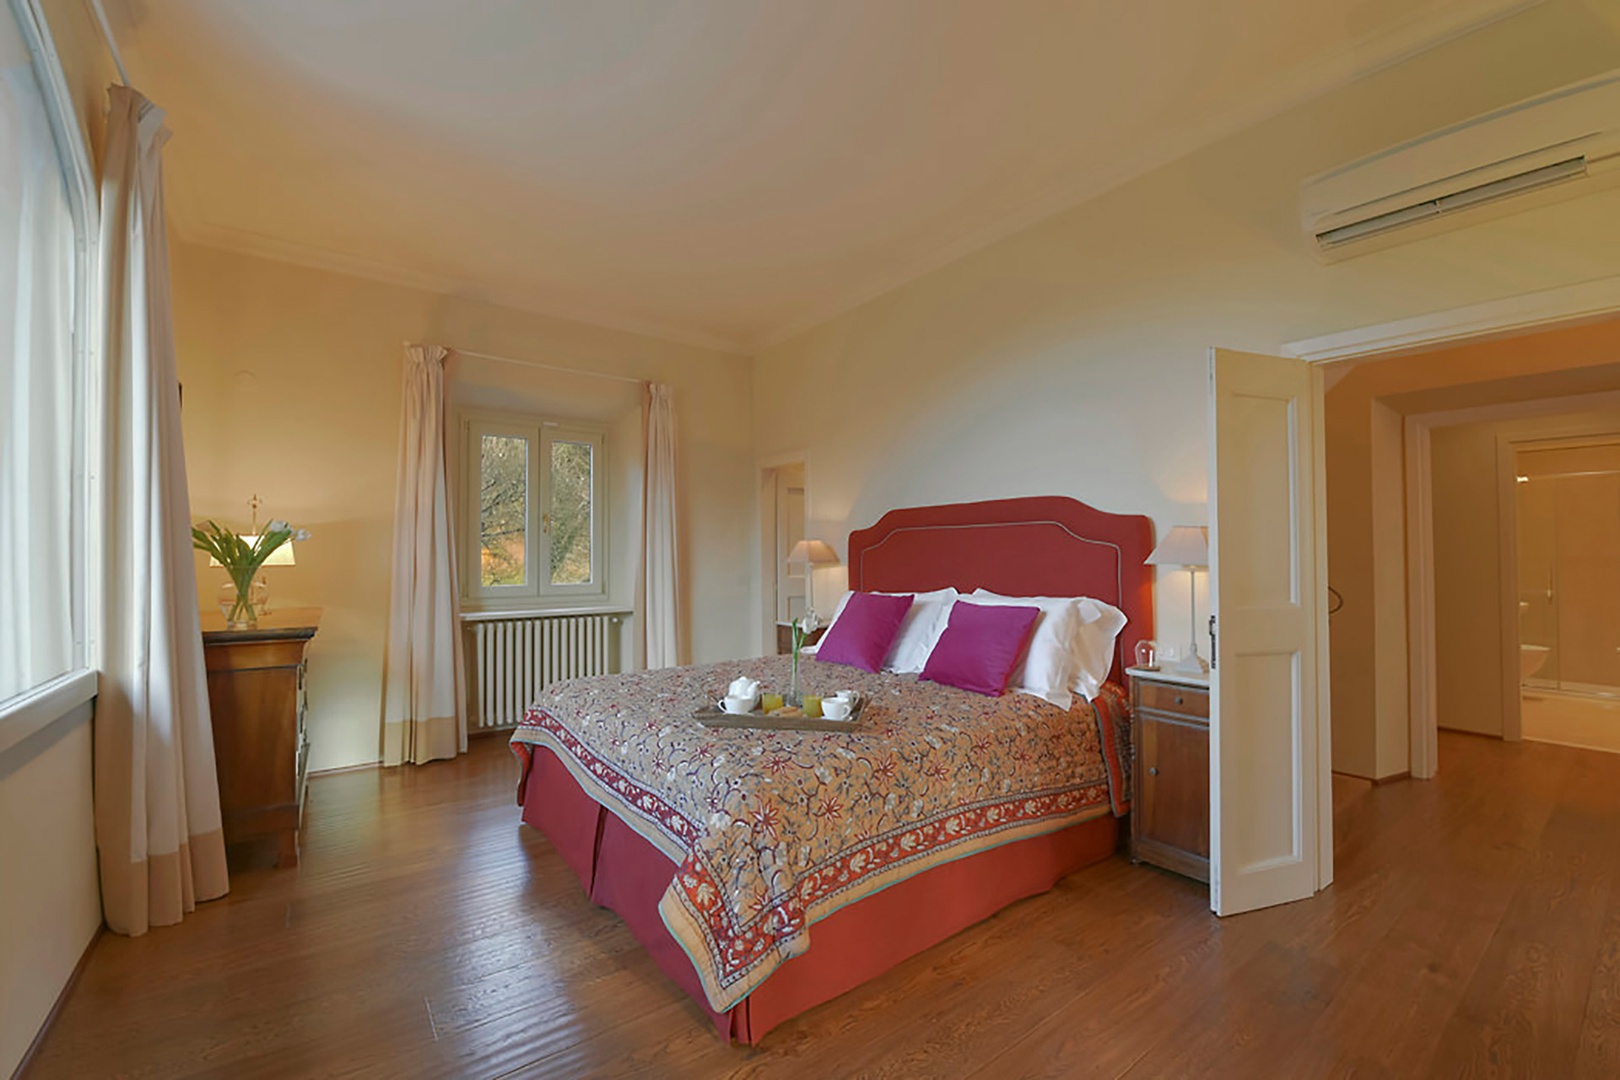 Each bedroom at Villa Felice has beds that can be prepared apart as two beds.